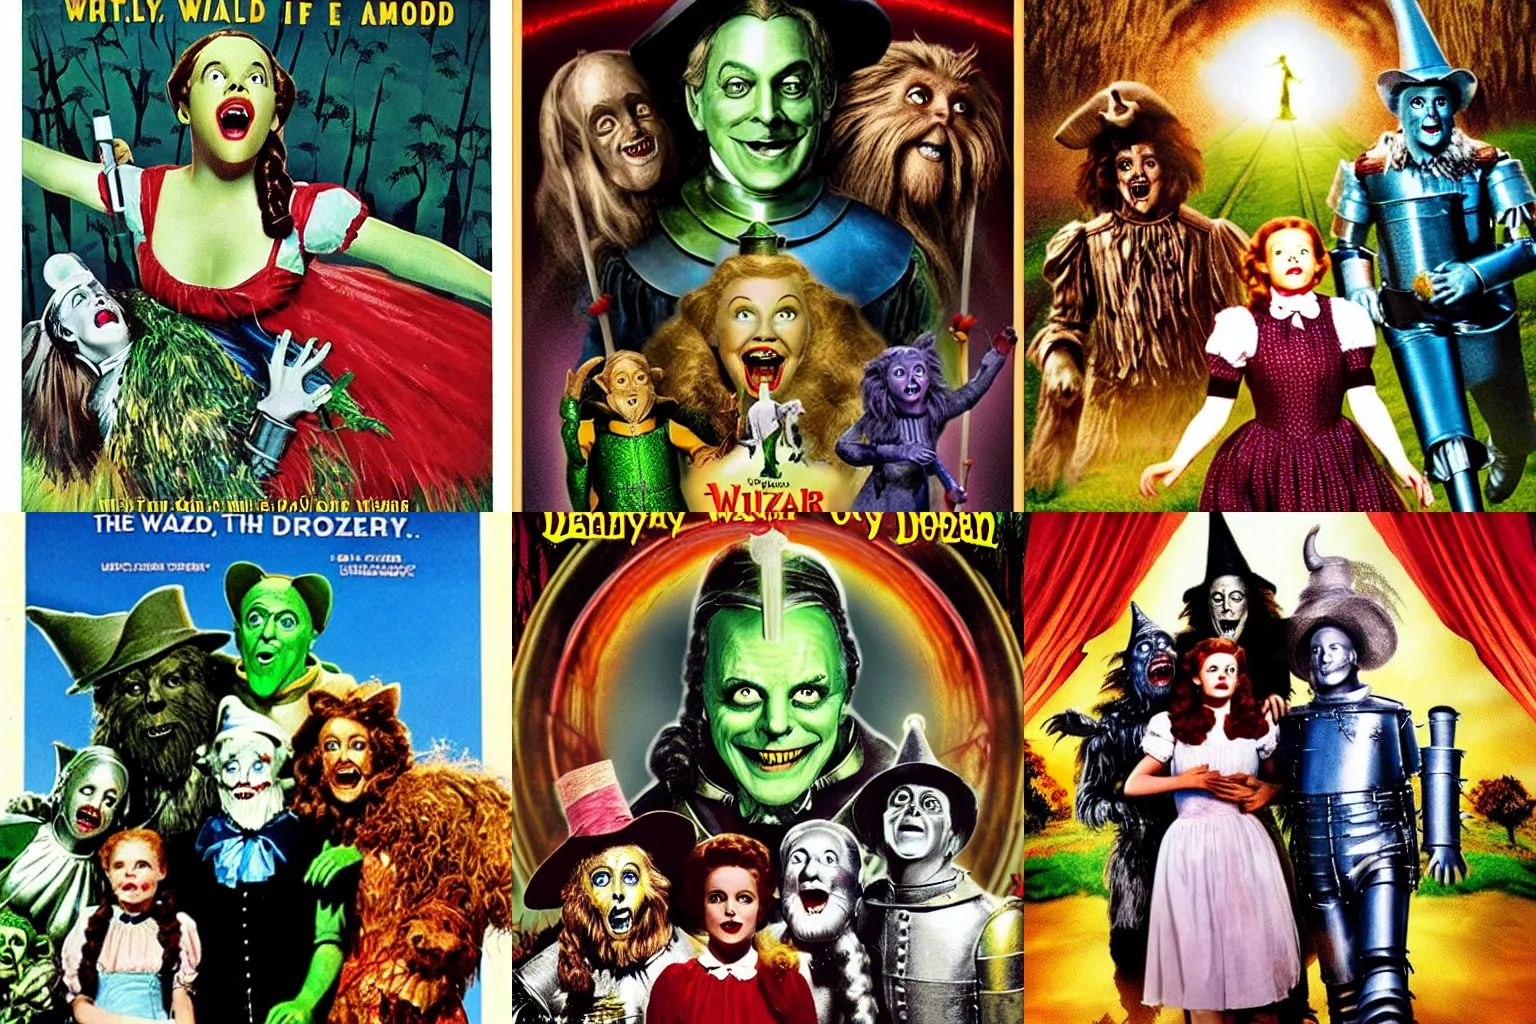 Prompt: The Wizard of Oz with a zombie Dorothy, Wizard of Oz parody, movie poster with ensemble photo